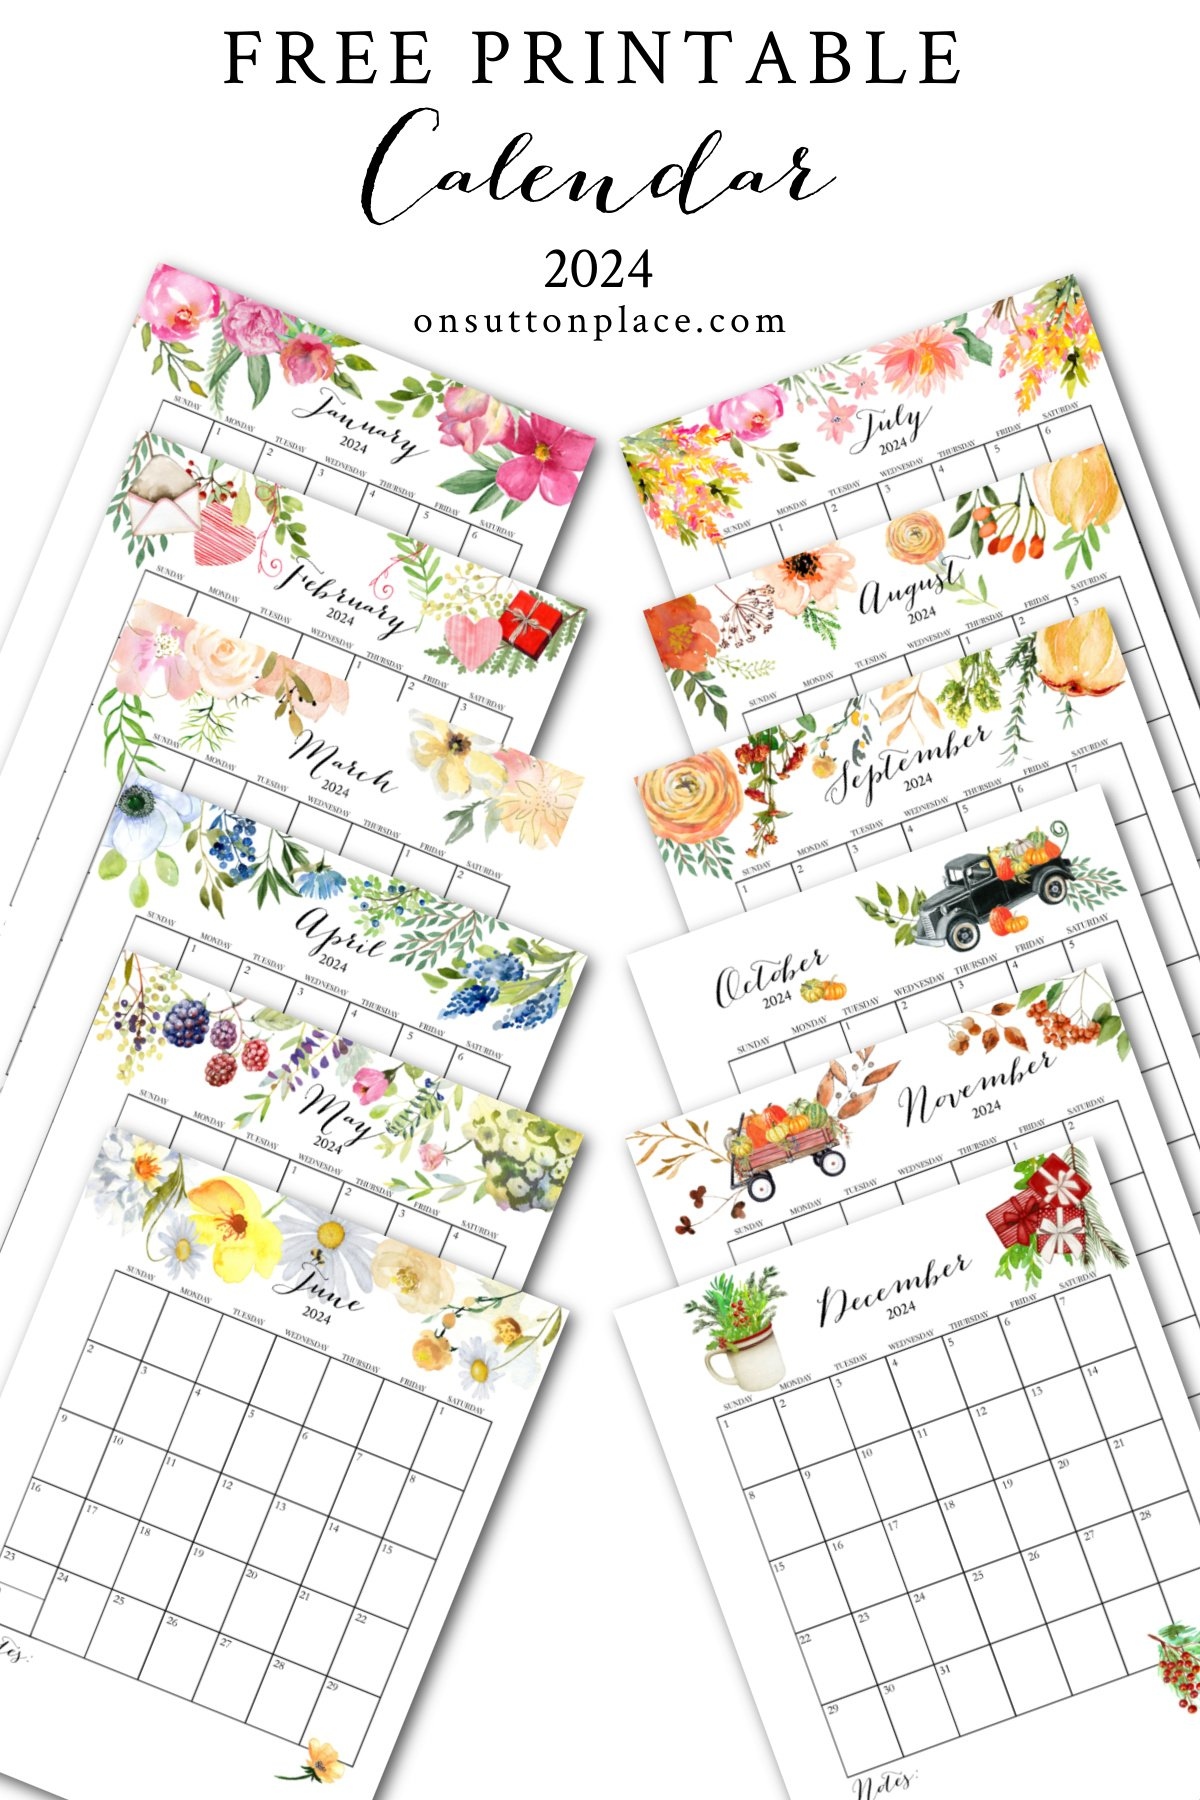 2024 Free Printable Calendar With Planner Pages - On Sutton Place inside Free Printable Calendar 2024 With Verses